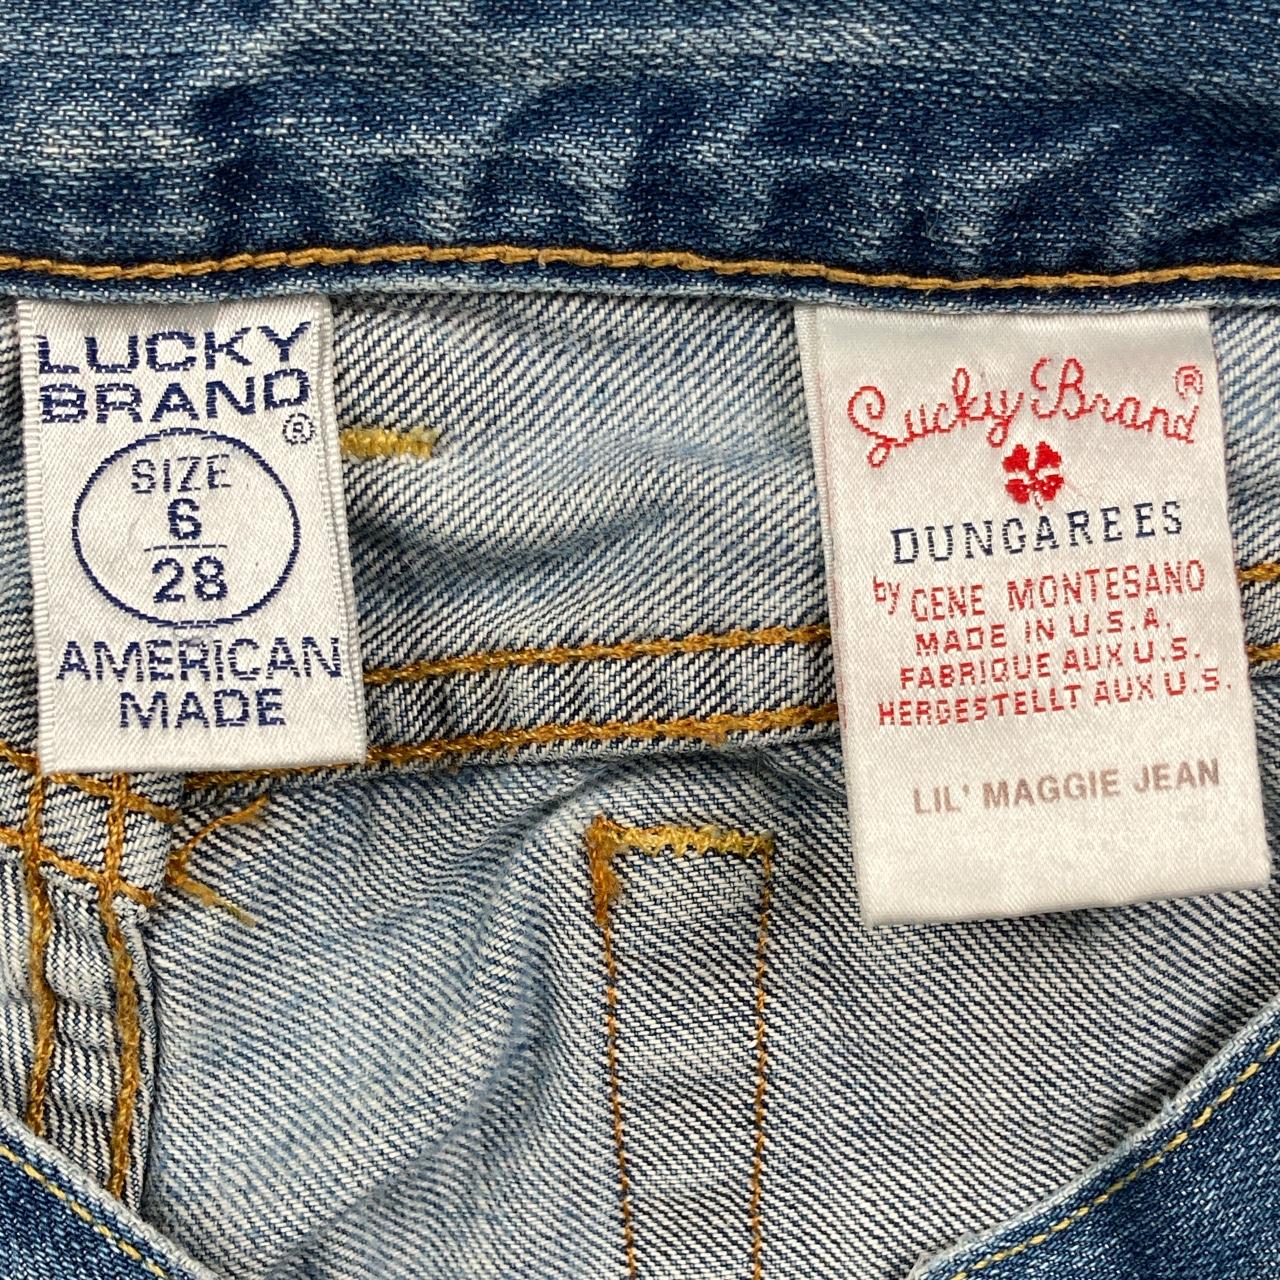 Vintage Lucky Brand Lil’ Maggie Jean Dungarees. Made